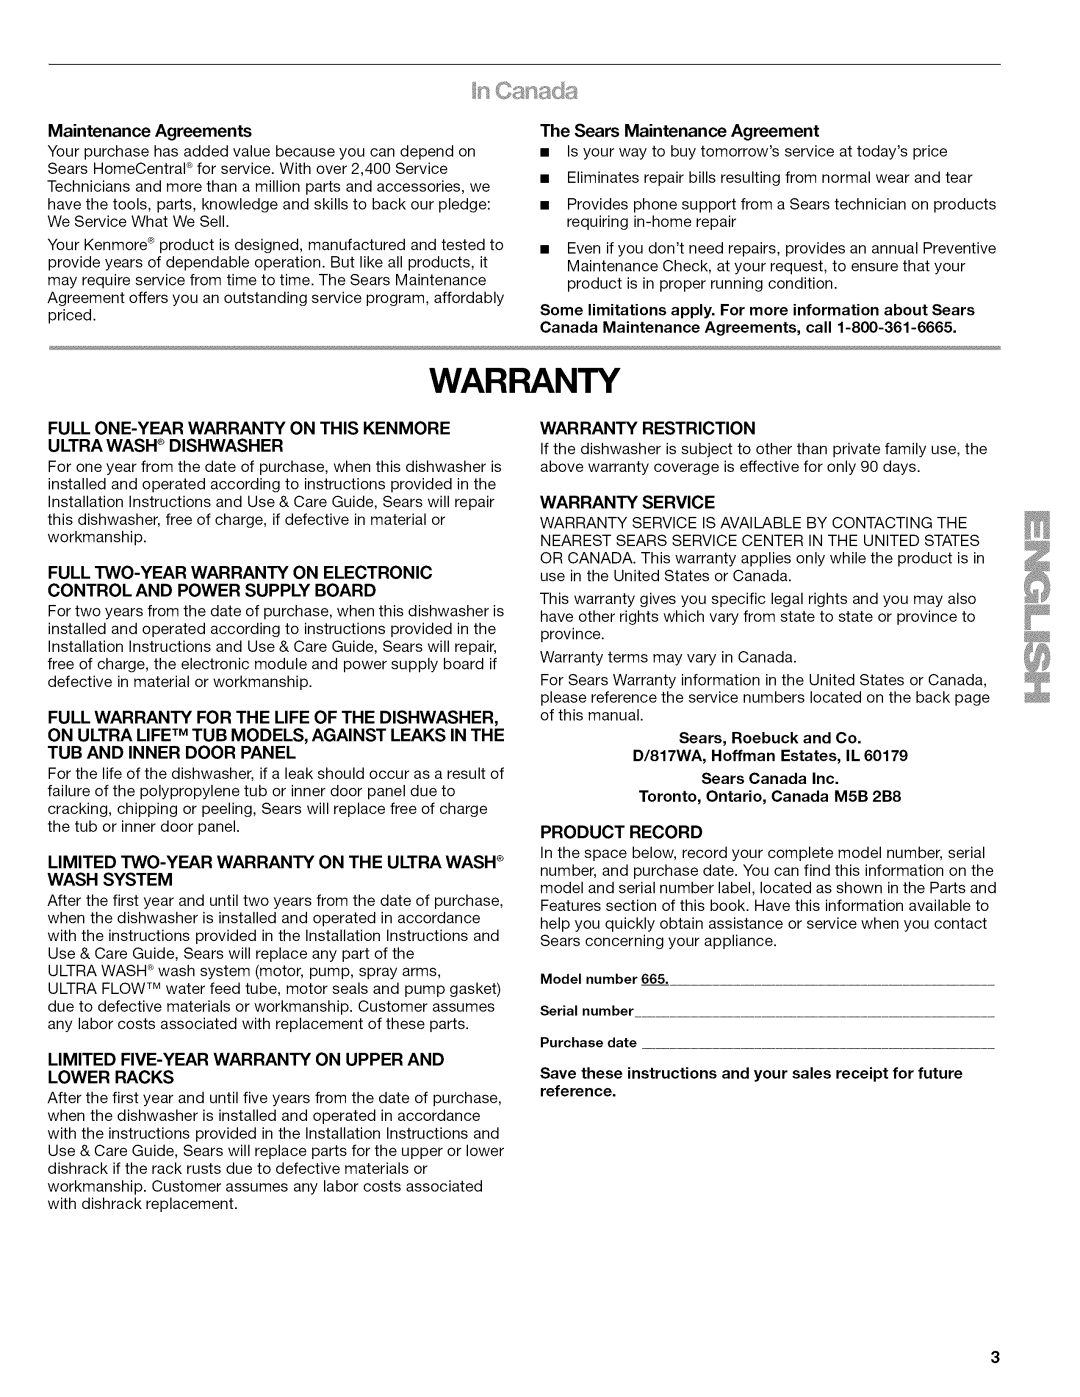 Kenmore 665.1622 Warranty, Maintenance Agreements, The Sears Maintenance Agreement, Tub And Inner Door Panel, Wash System 